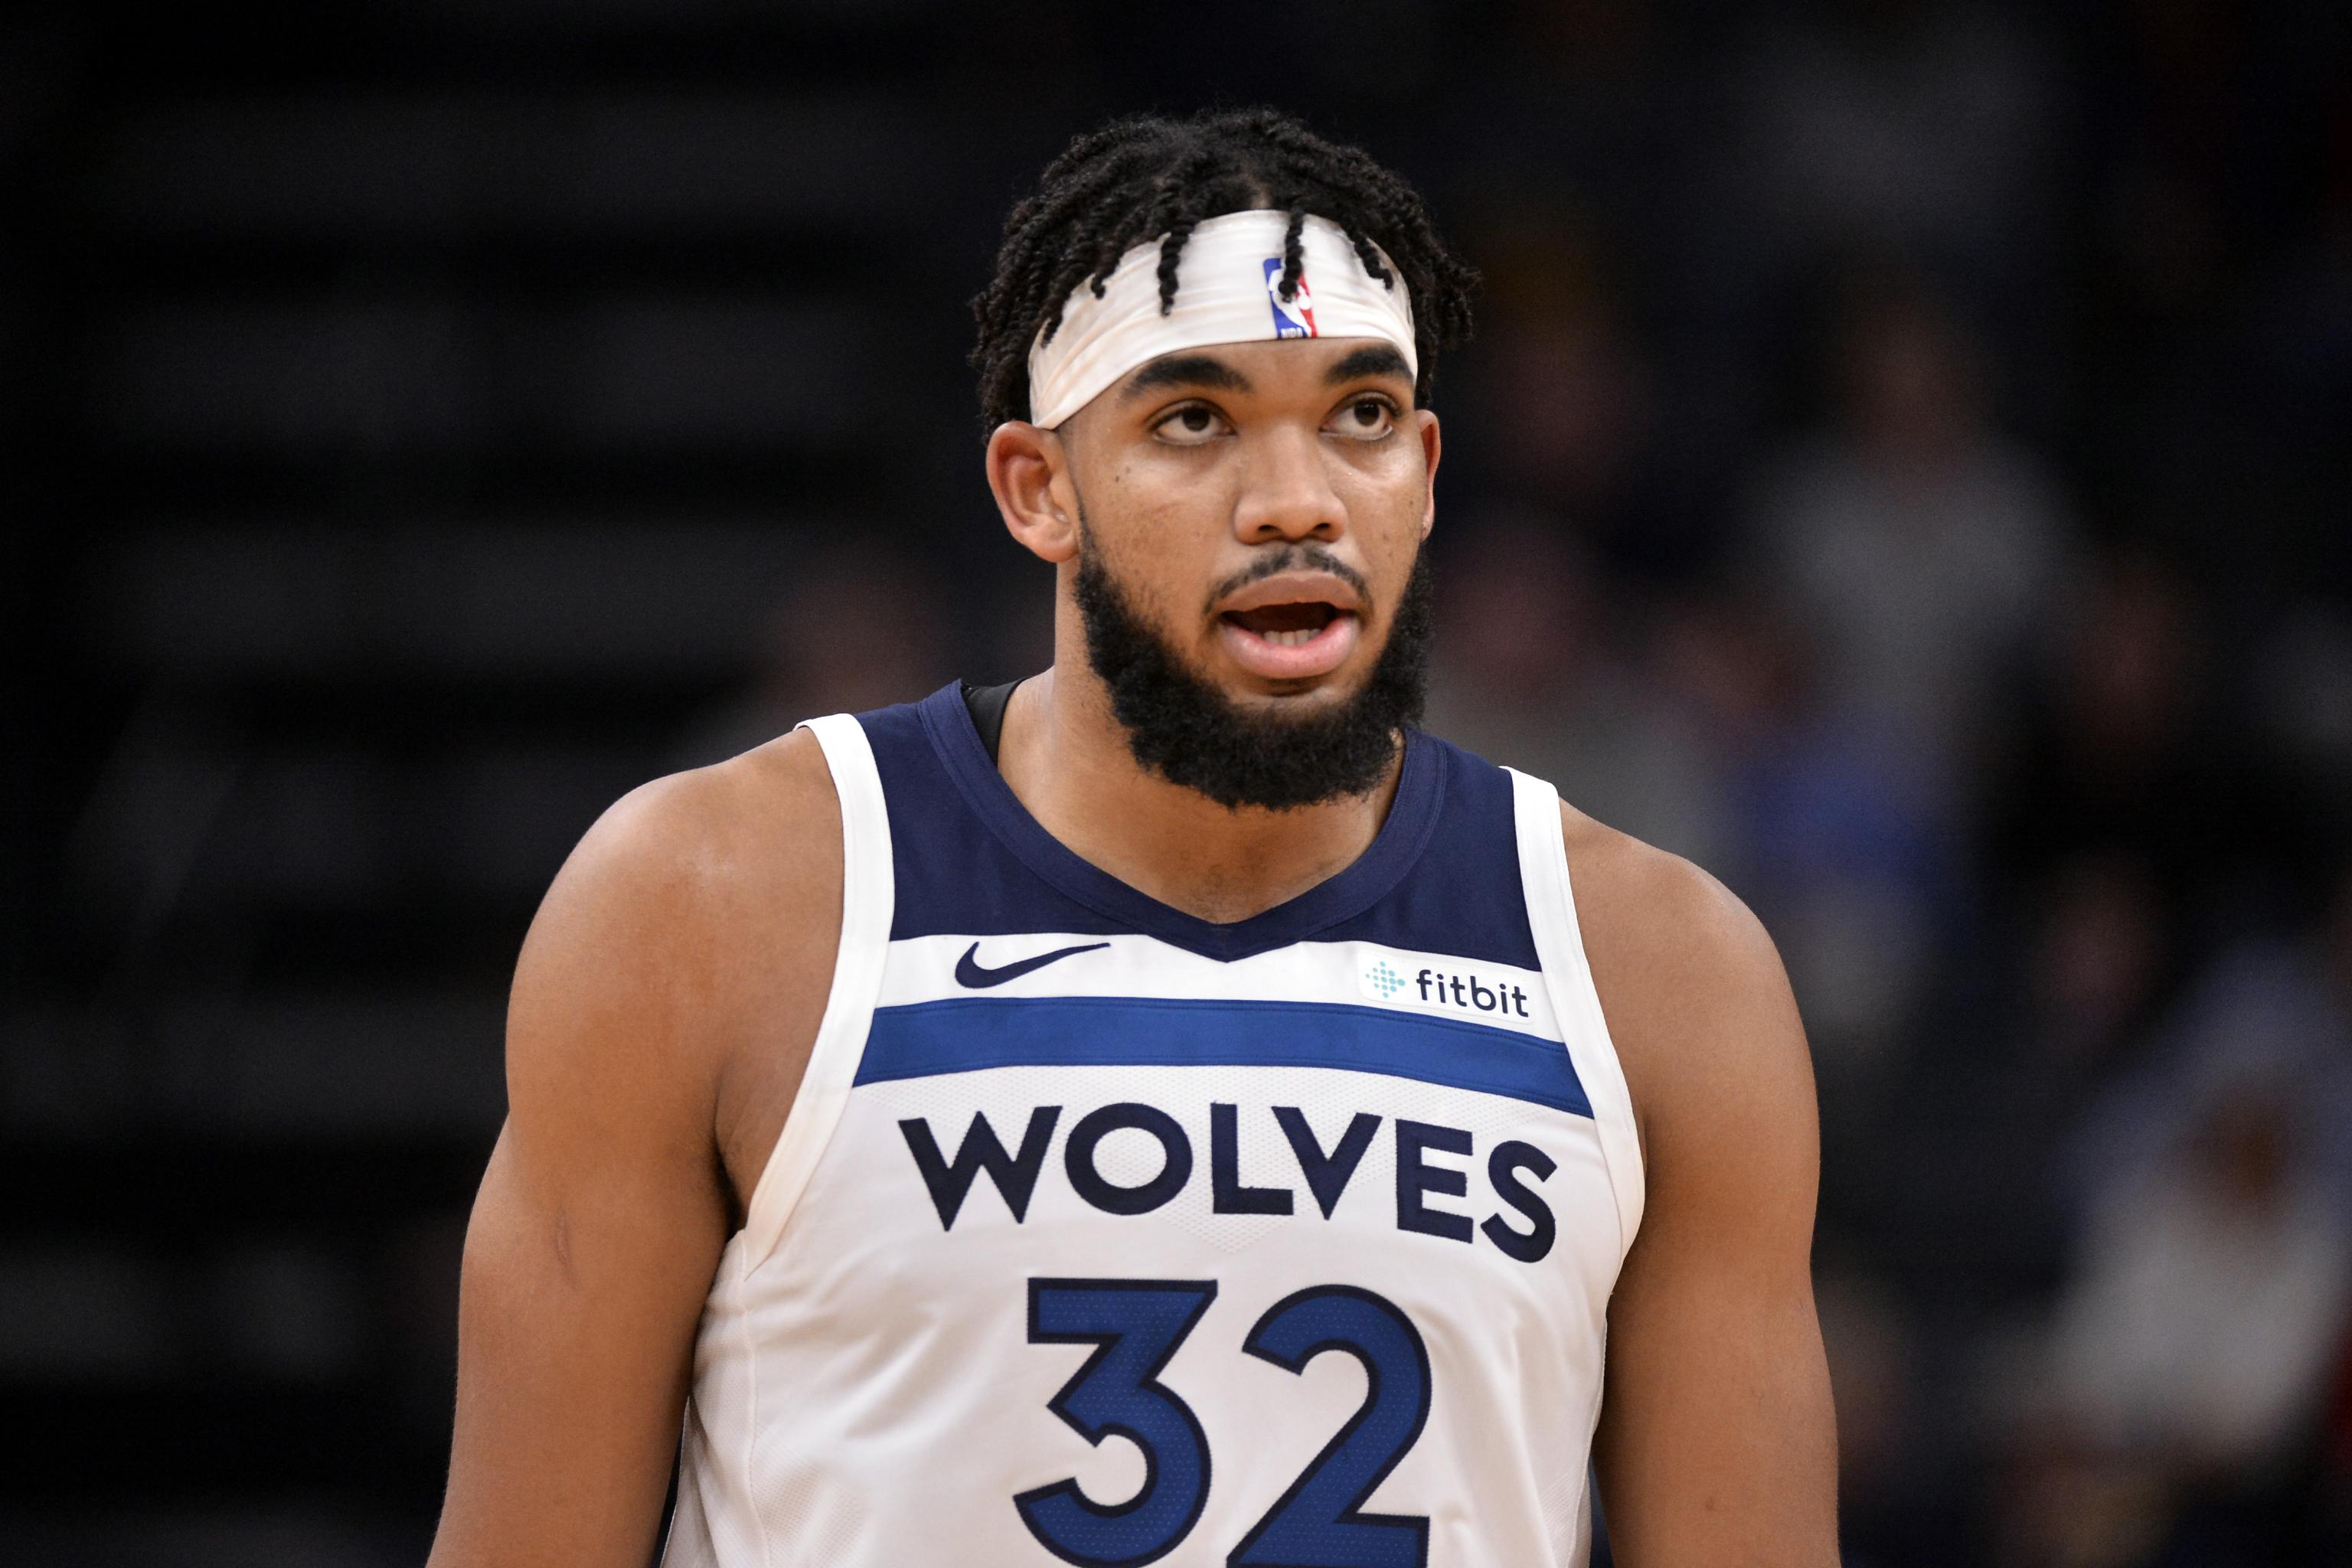 Karl-Anthony Towns lost 50 pounds battling COVID-19 last NBA season